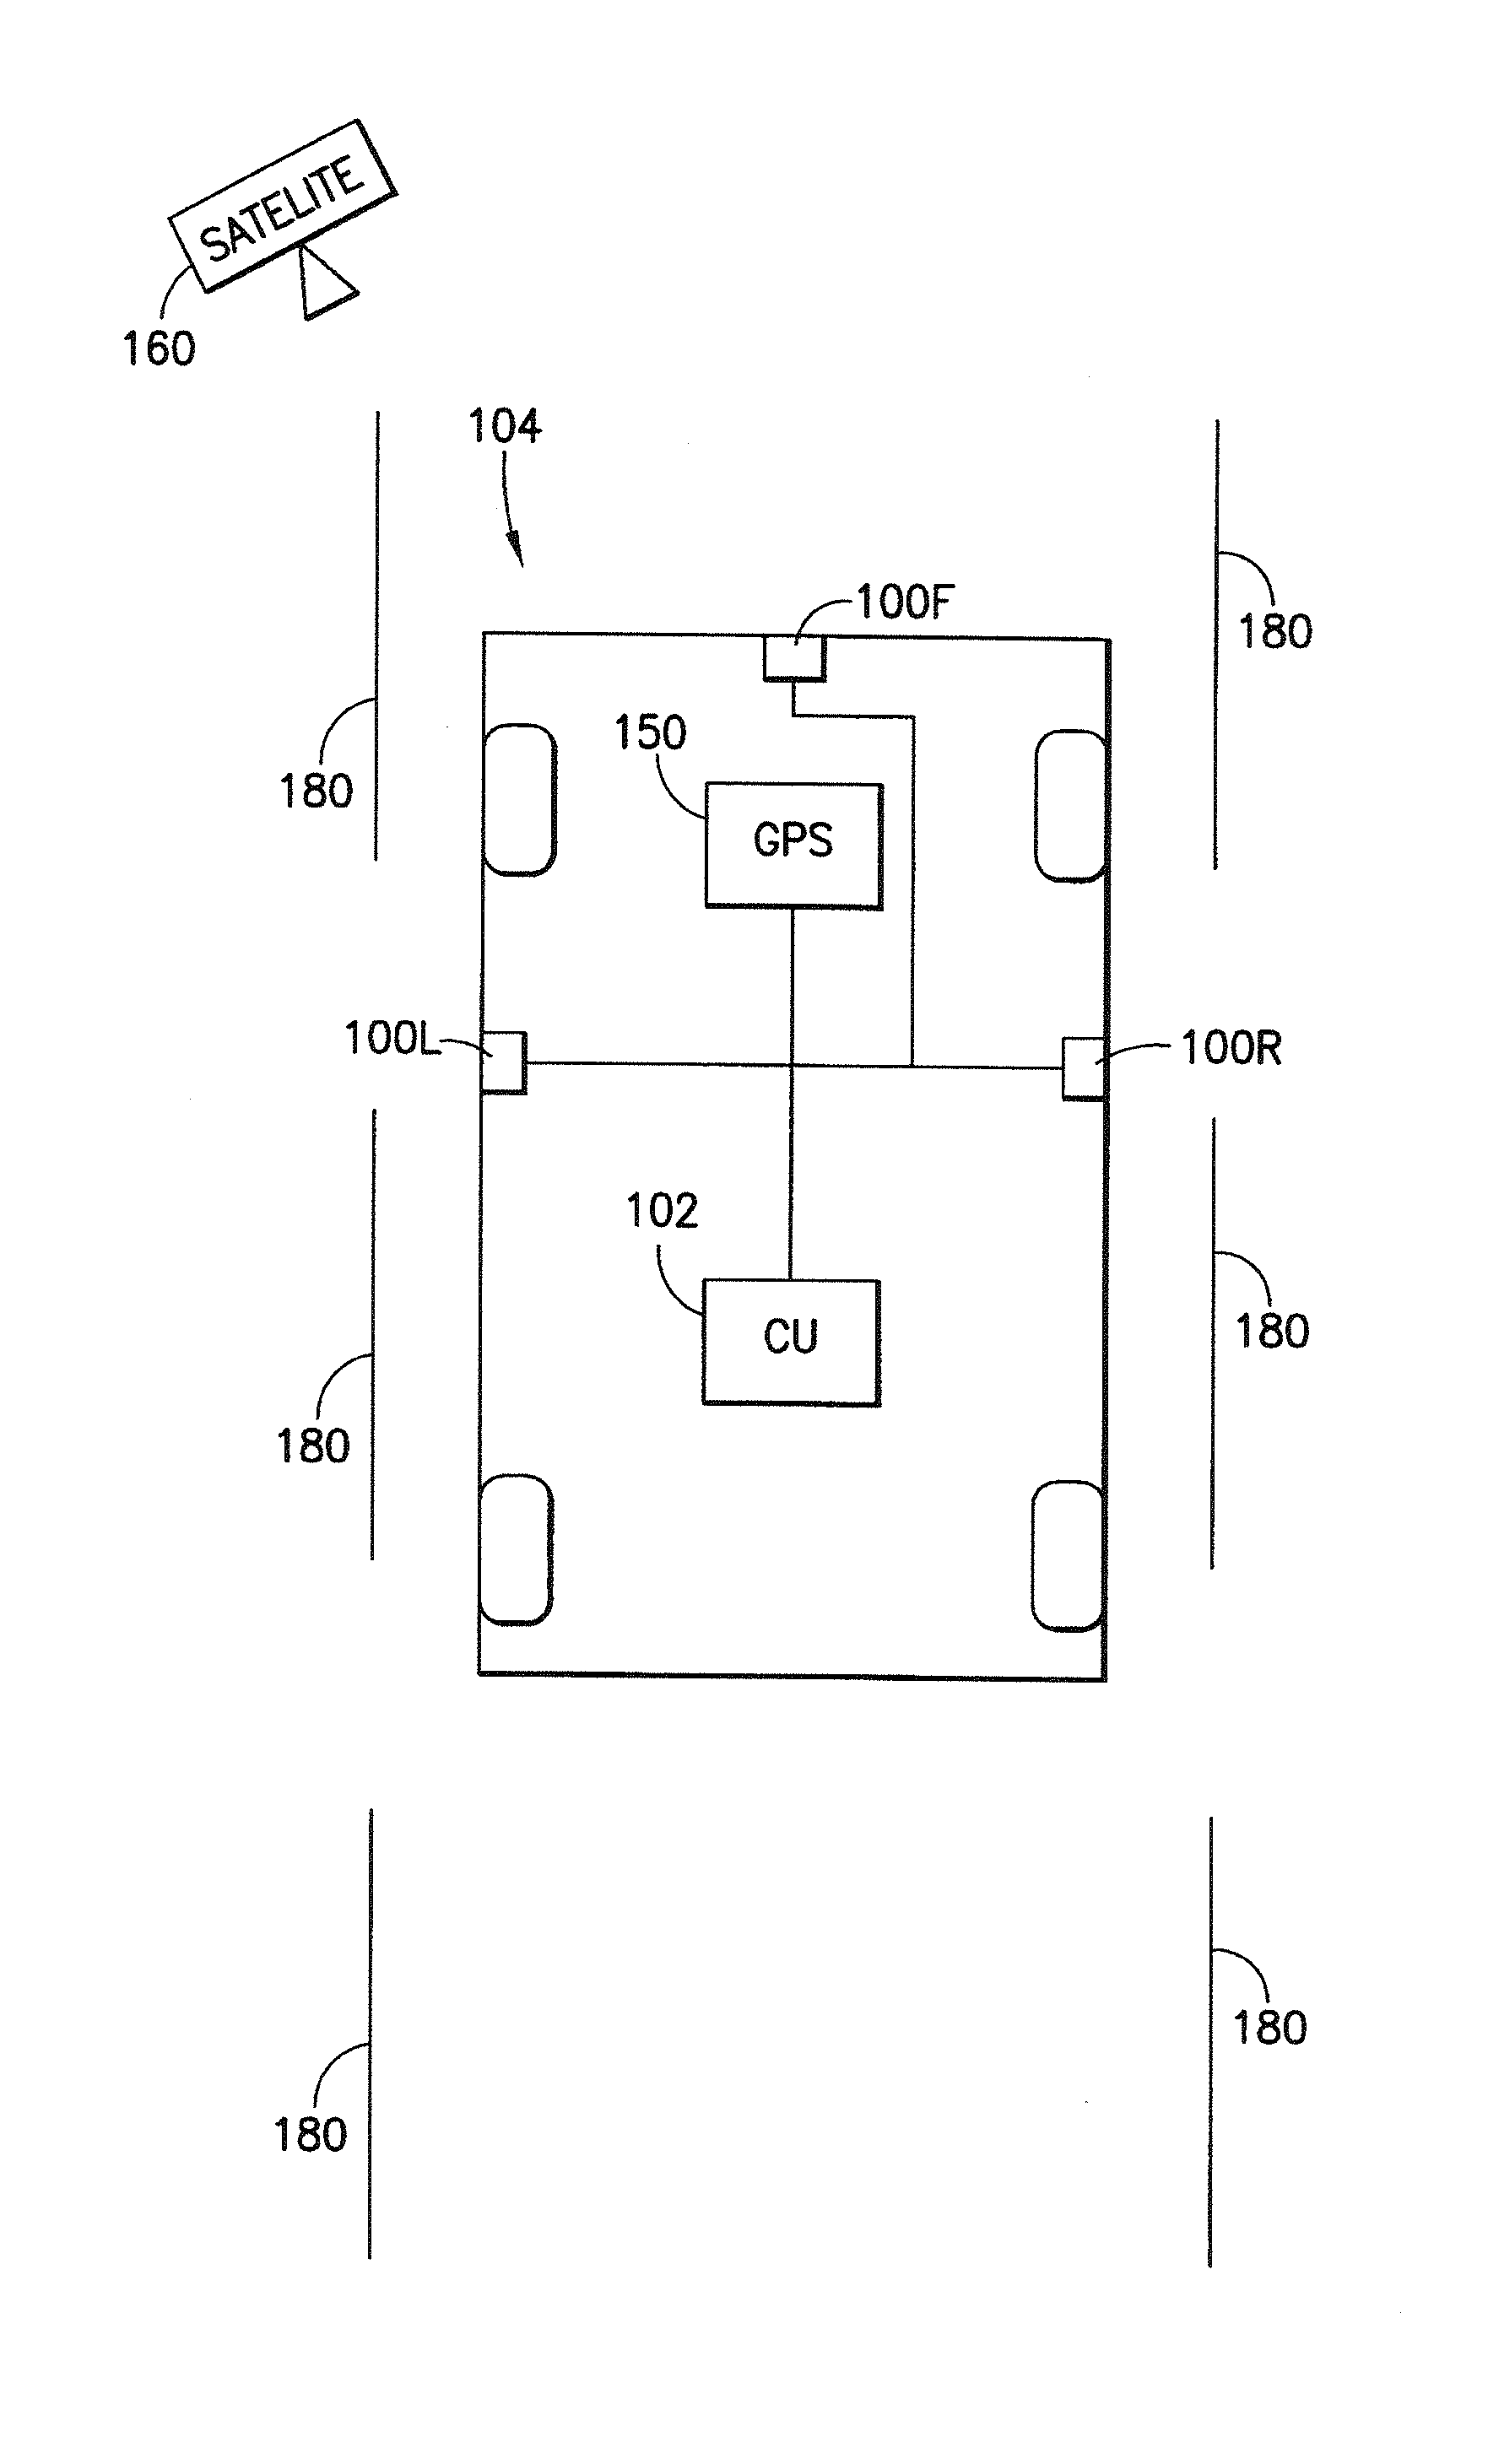 System and method of integrating lane position monitoring with locational information systems